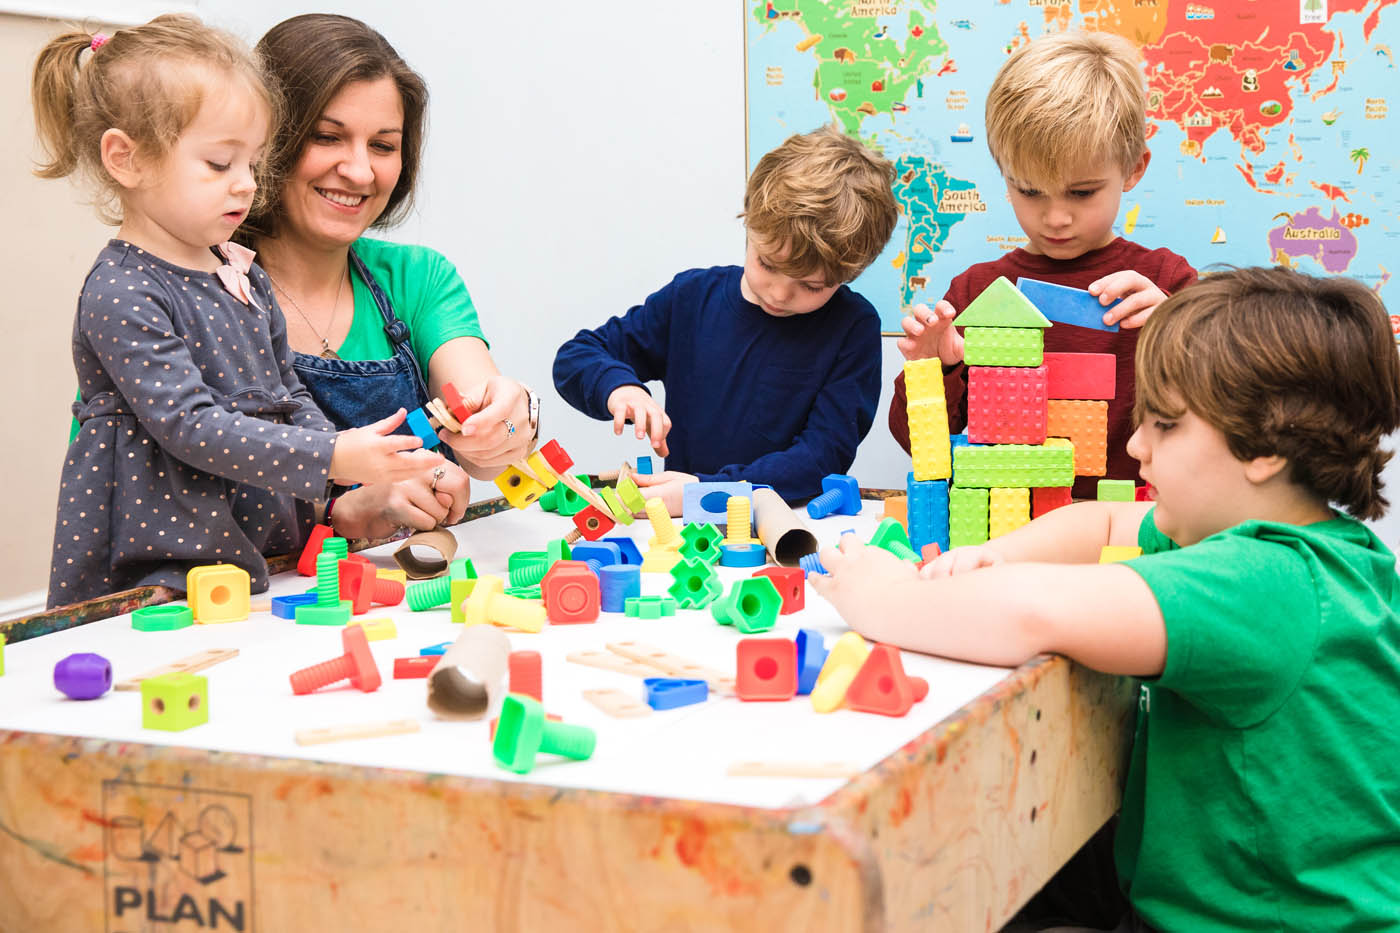 A teacher at Kids Garden playing with building blocks with a group of kids.